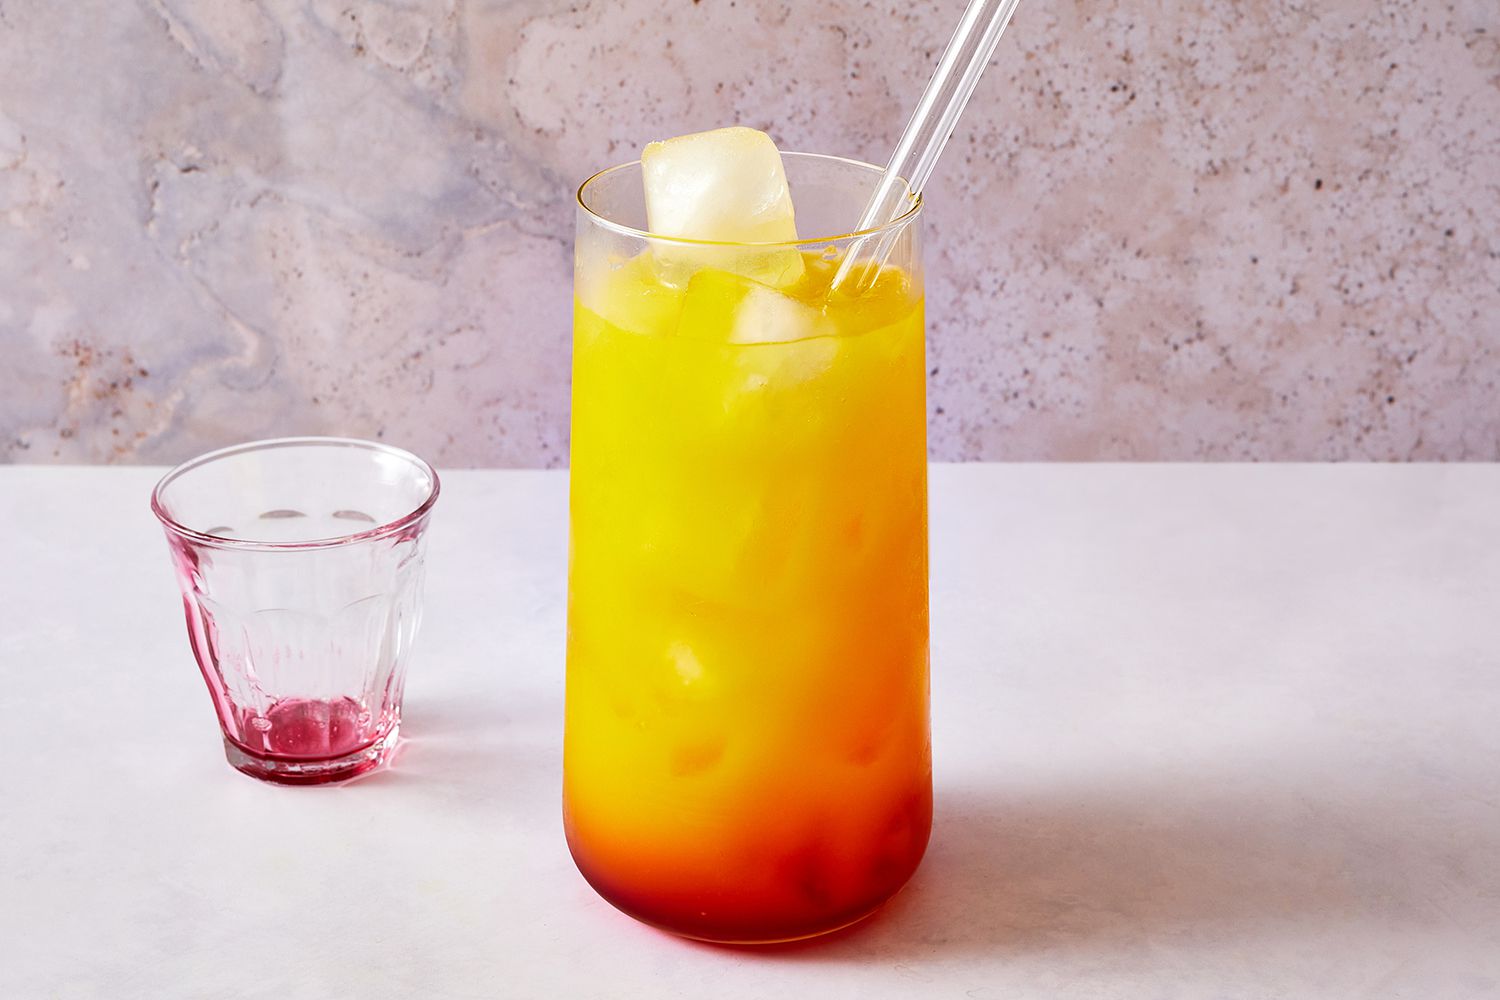 A high ball glass with orange juice, tequila, and grenadine 